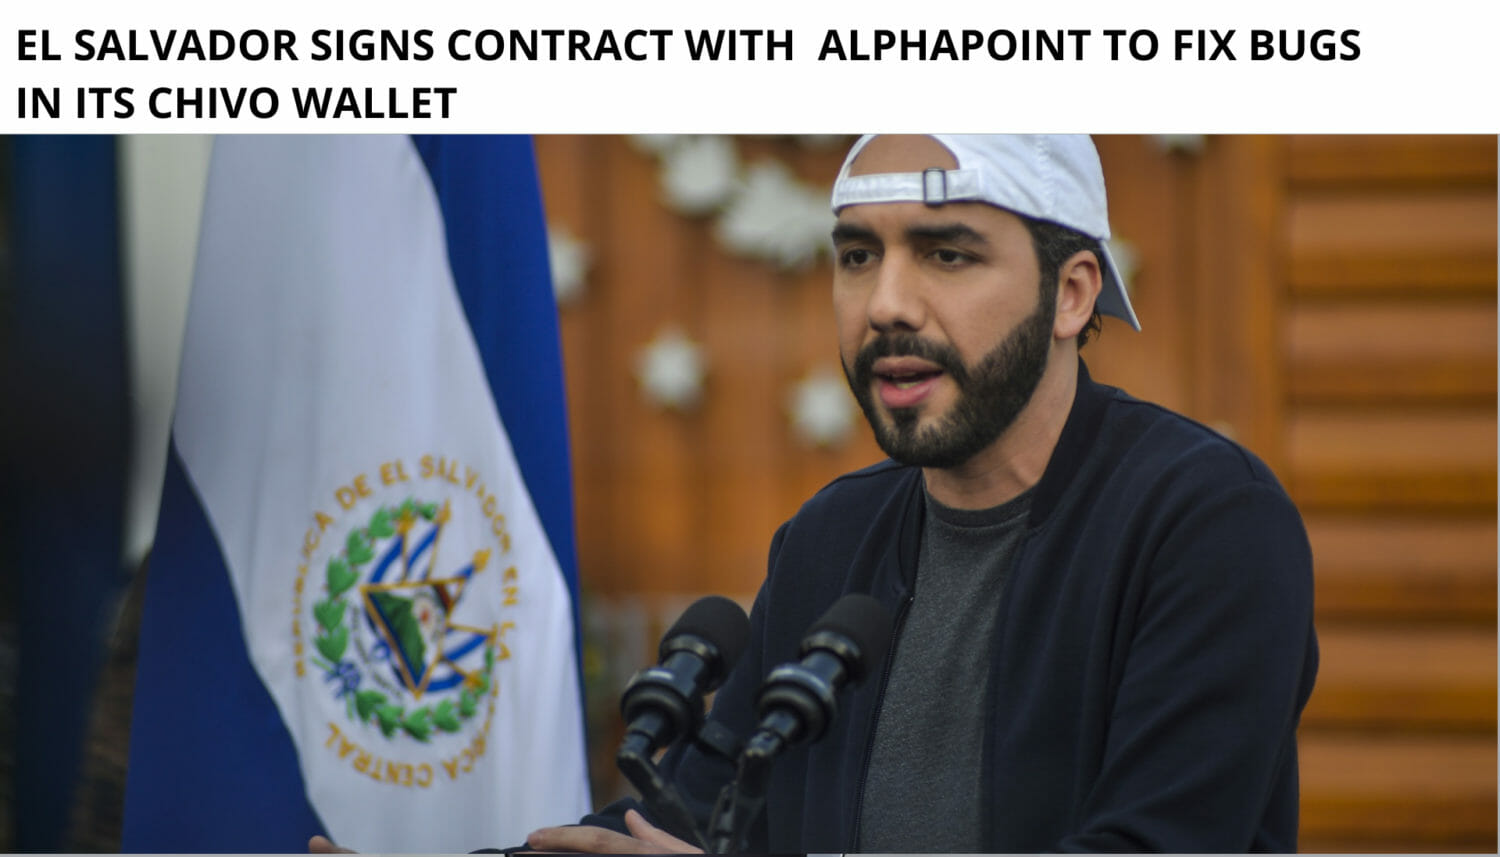 El Salvador Signs Contract With Alphapoint To Fix Bugs In Its Chivo Wallet